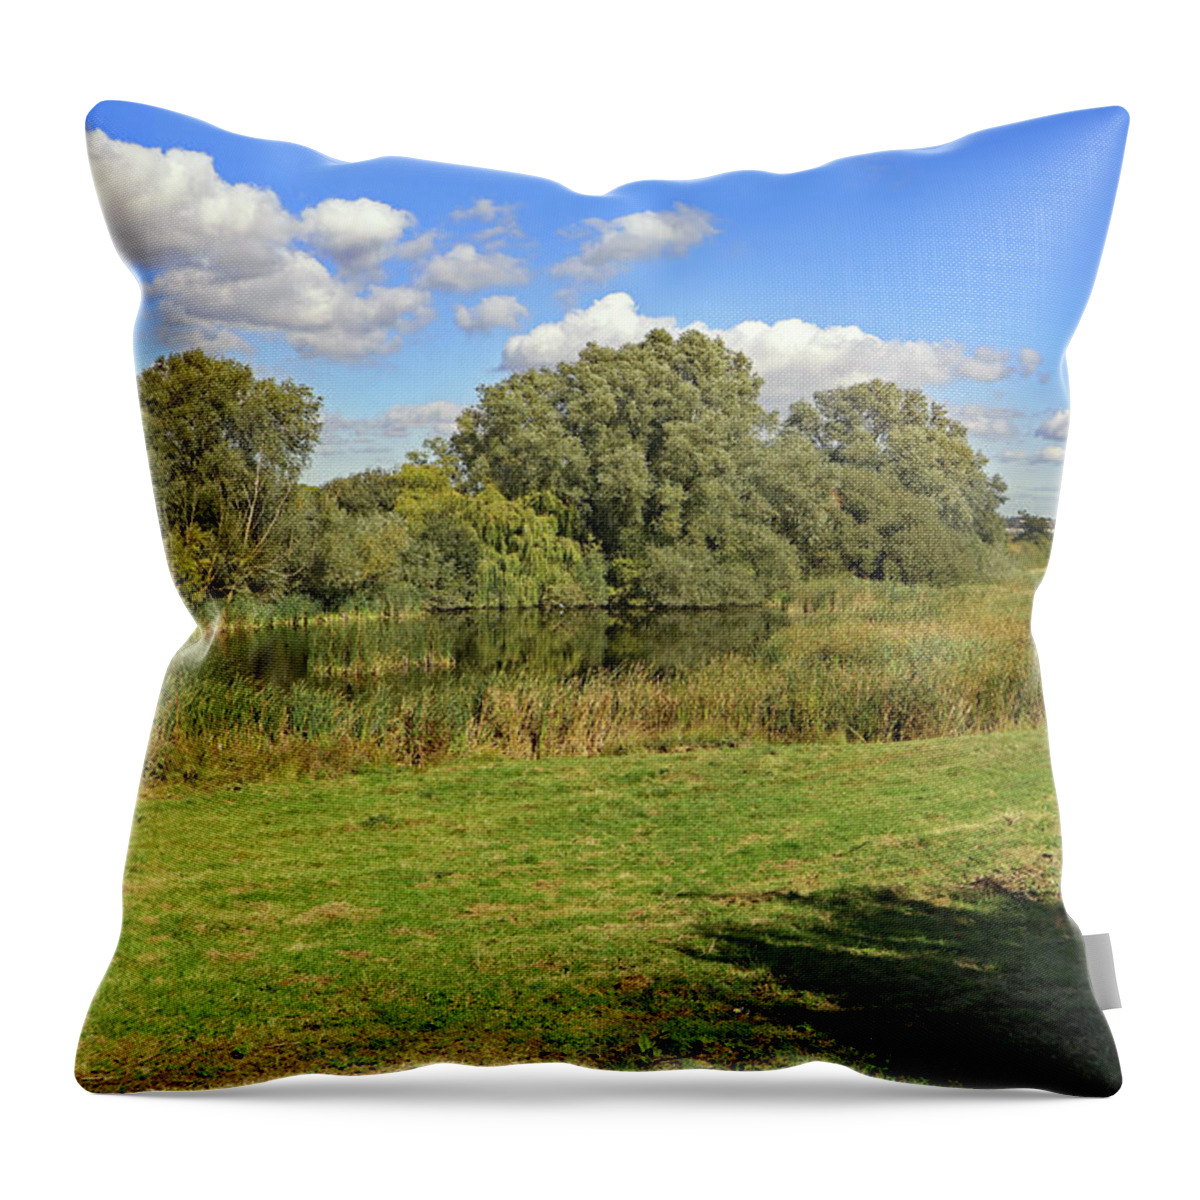 Pool Throw Pillow featuring the photograph Pool Cudmore Grove by Tony Murtagh